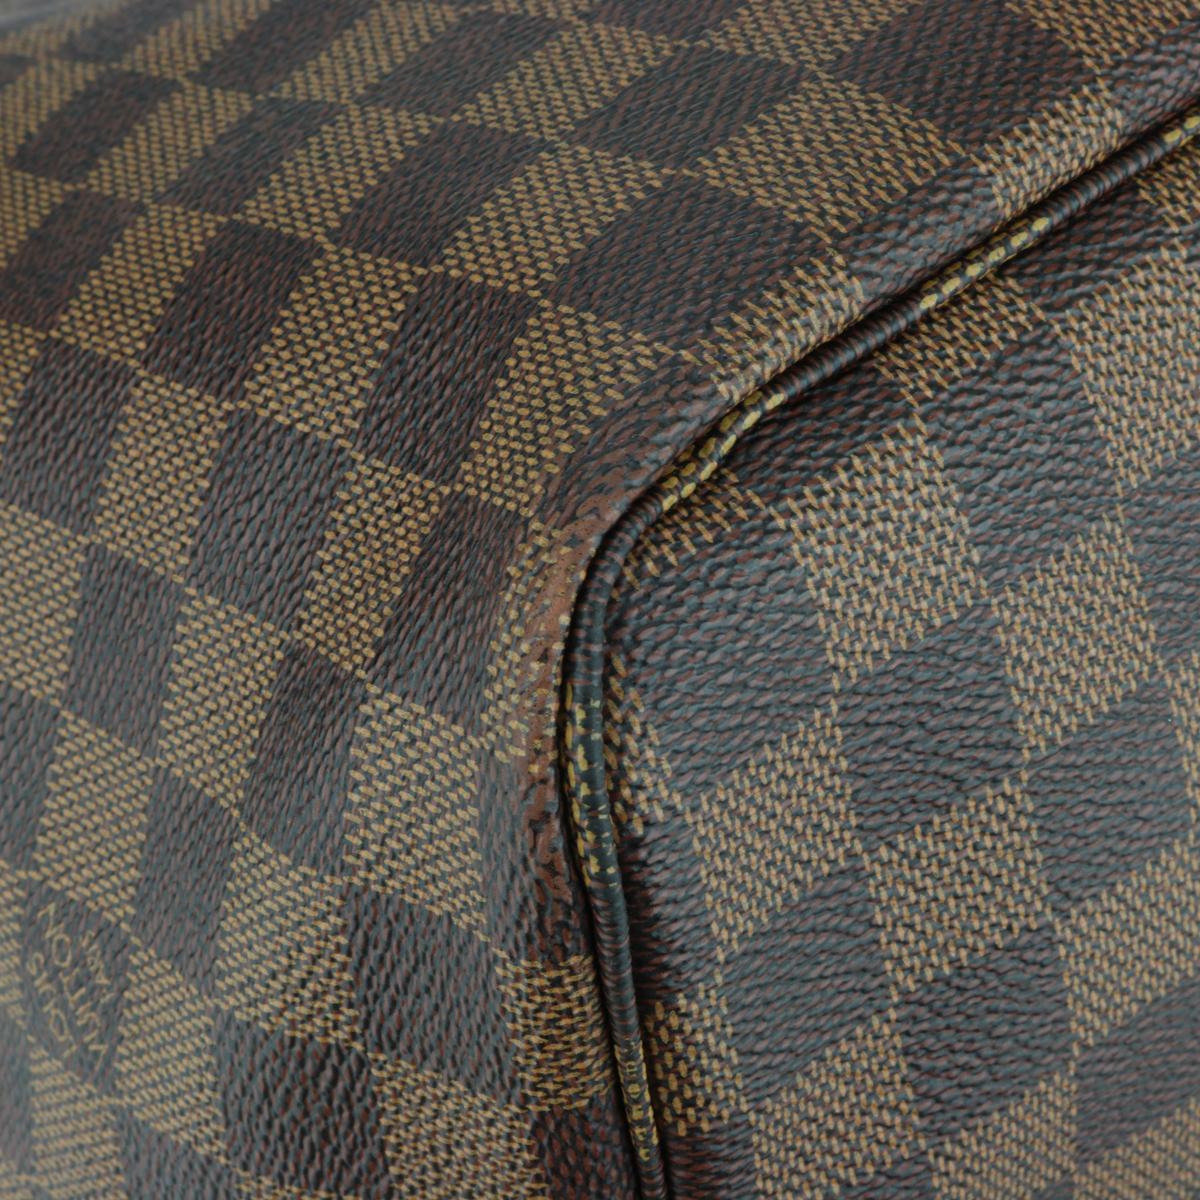 Louis Vuitton Neverfull GM Bag in Damier Ebène with Cherry Red Interior 2015 5